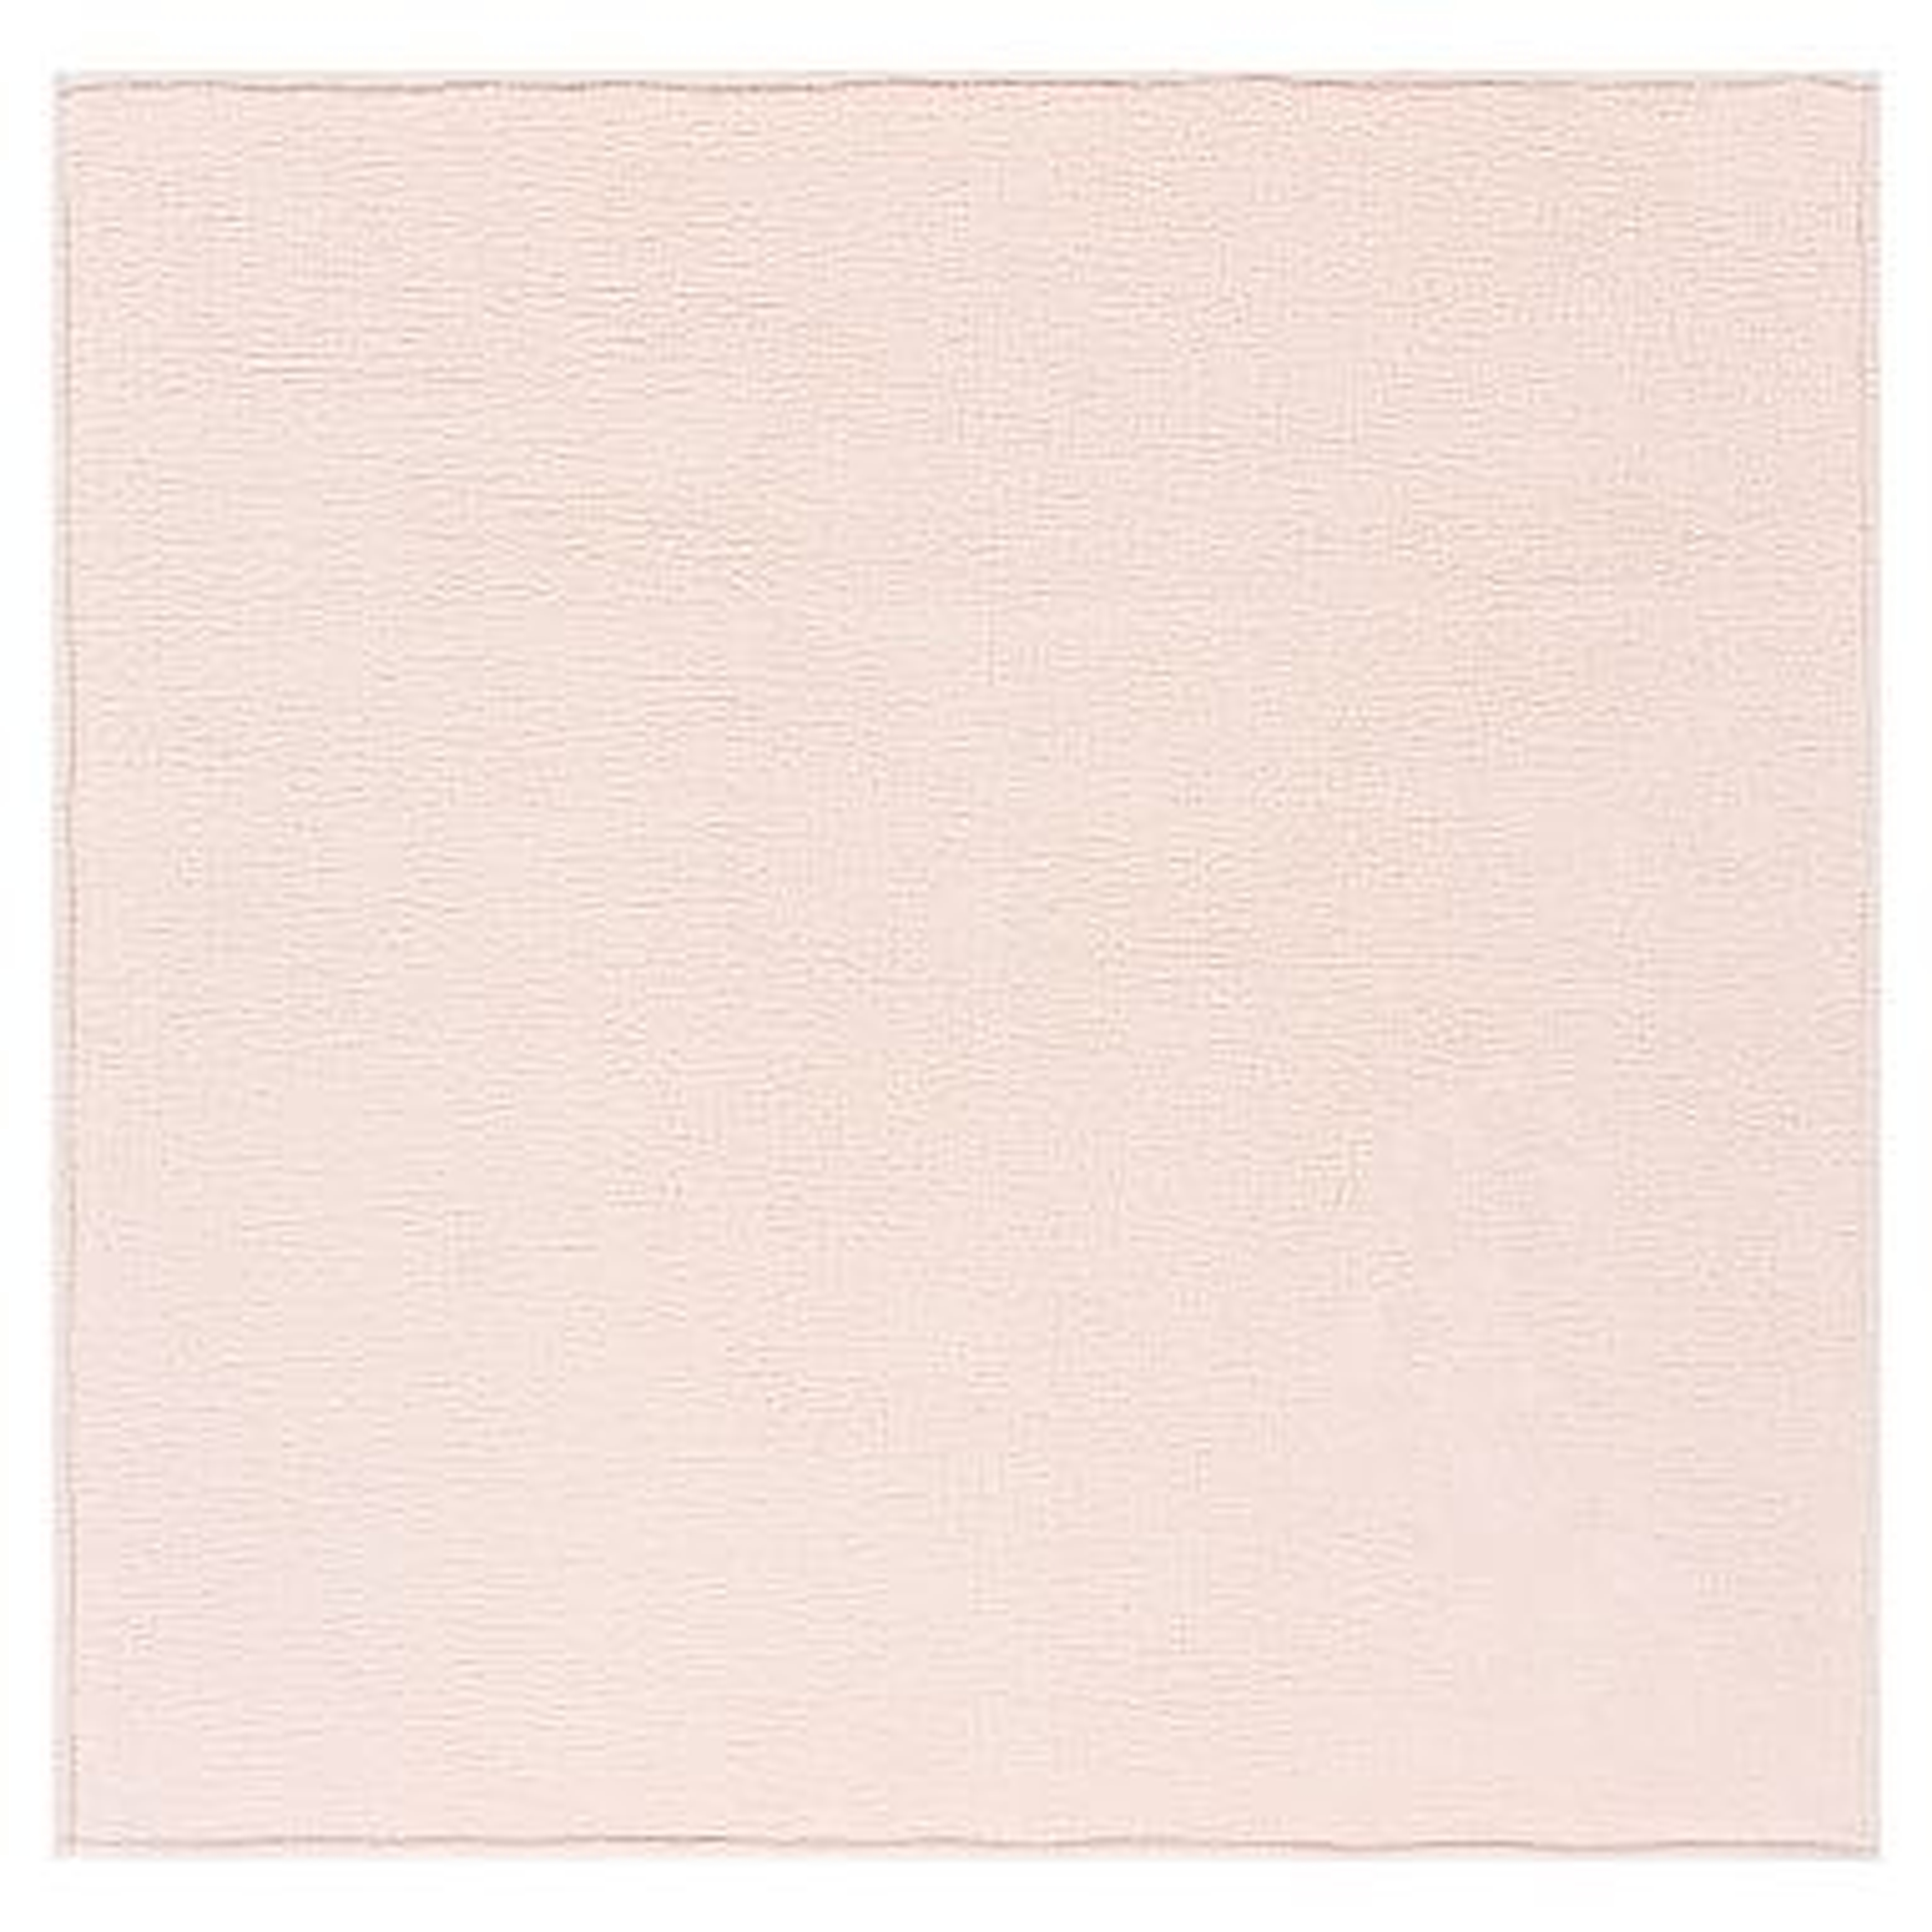 Cozy Bed Blanket, Full/Queen, Powdered Blush - Pottery Barn Teen